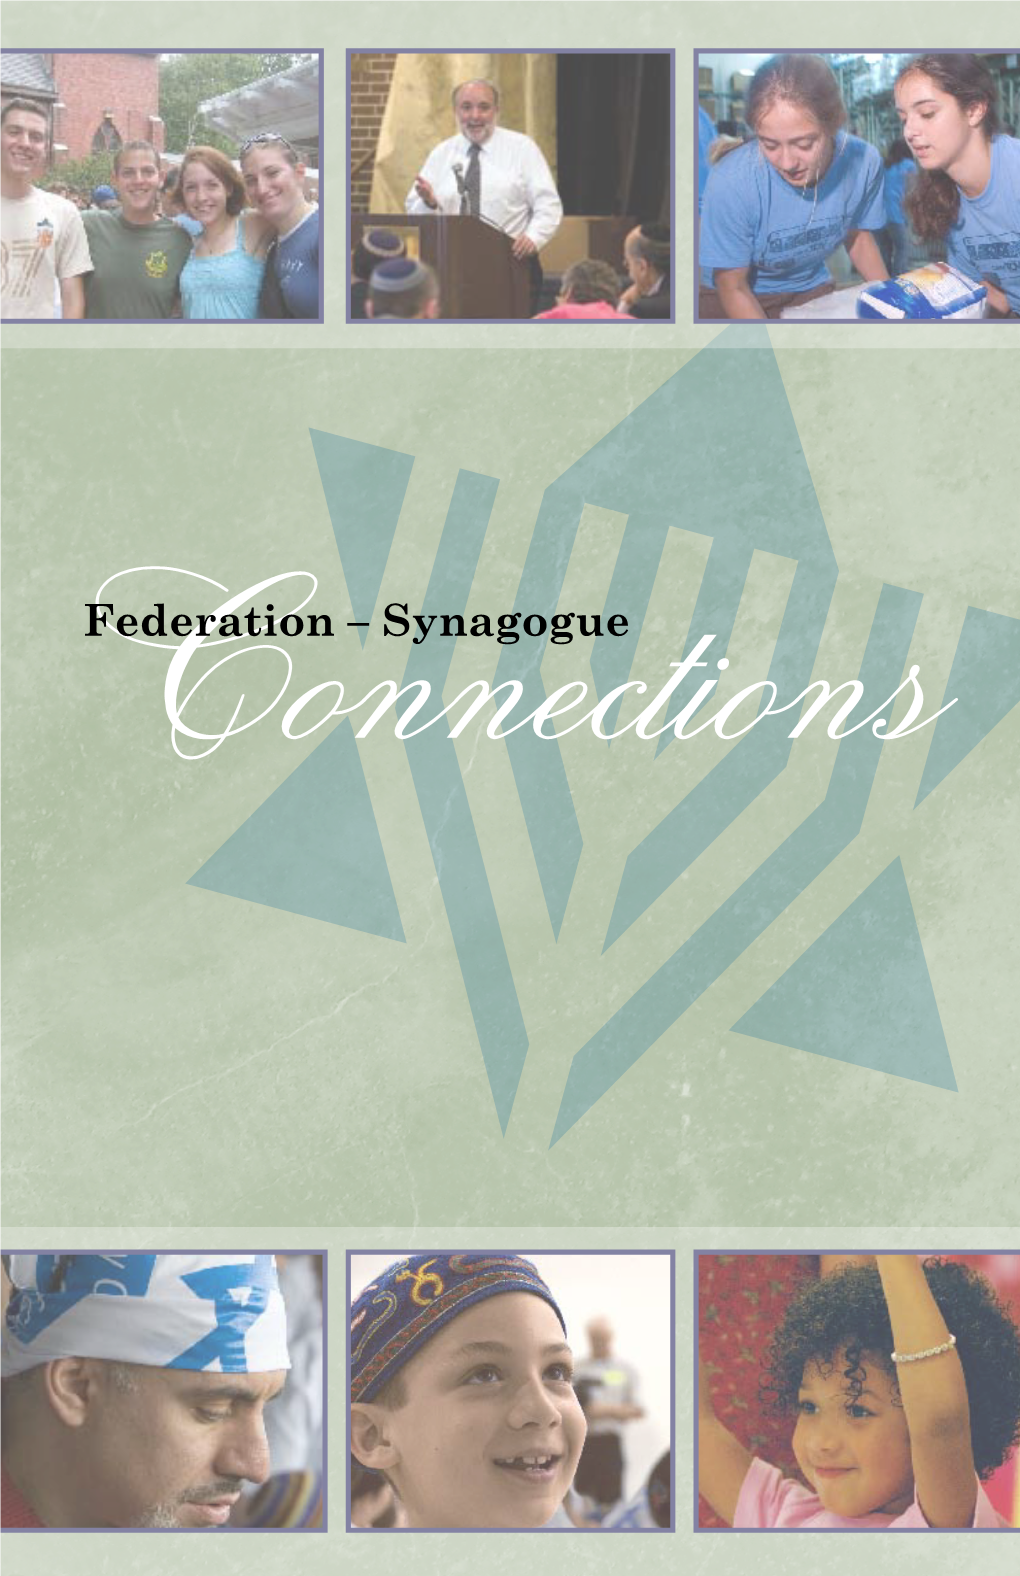 Connectionsfederation – Synagogue Community Building